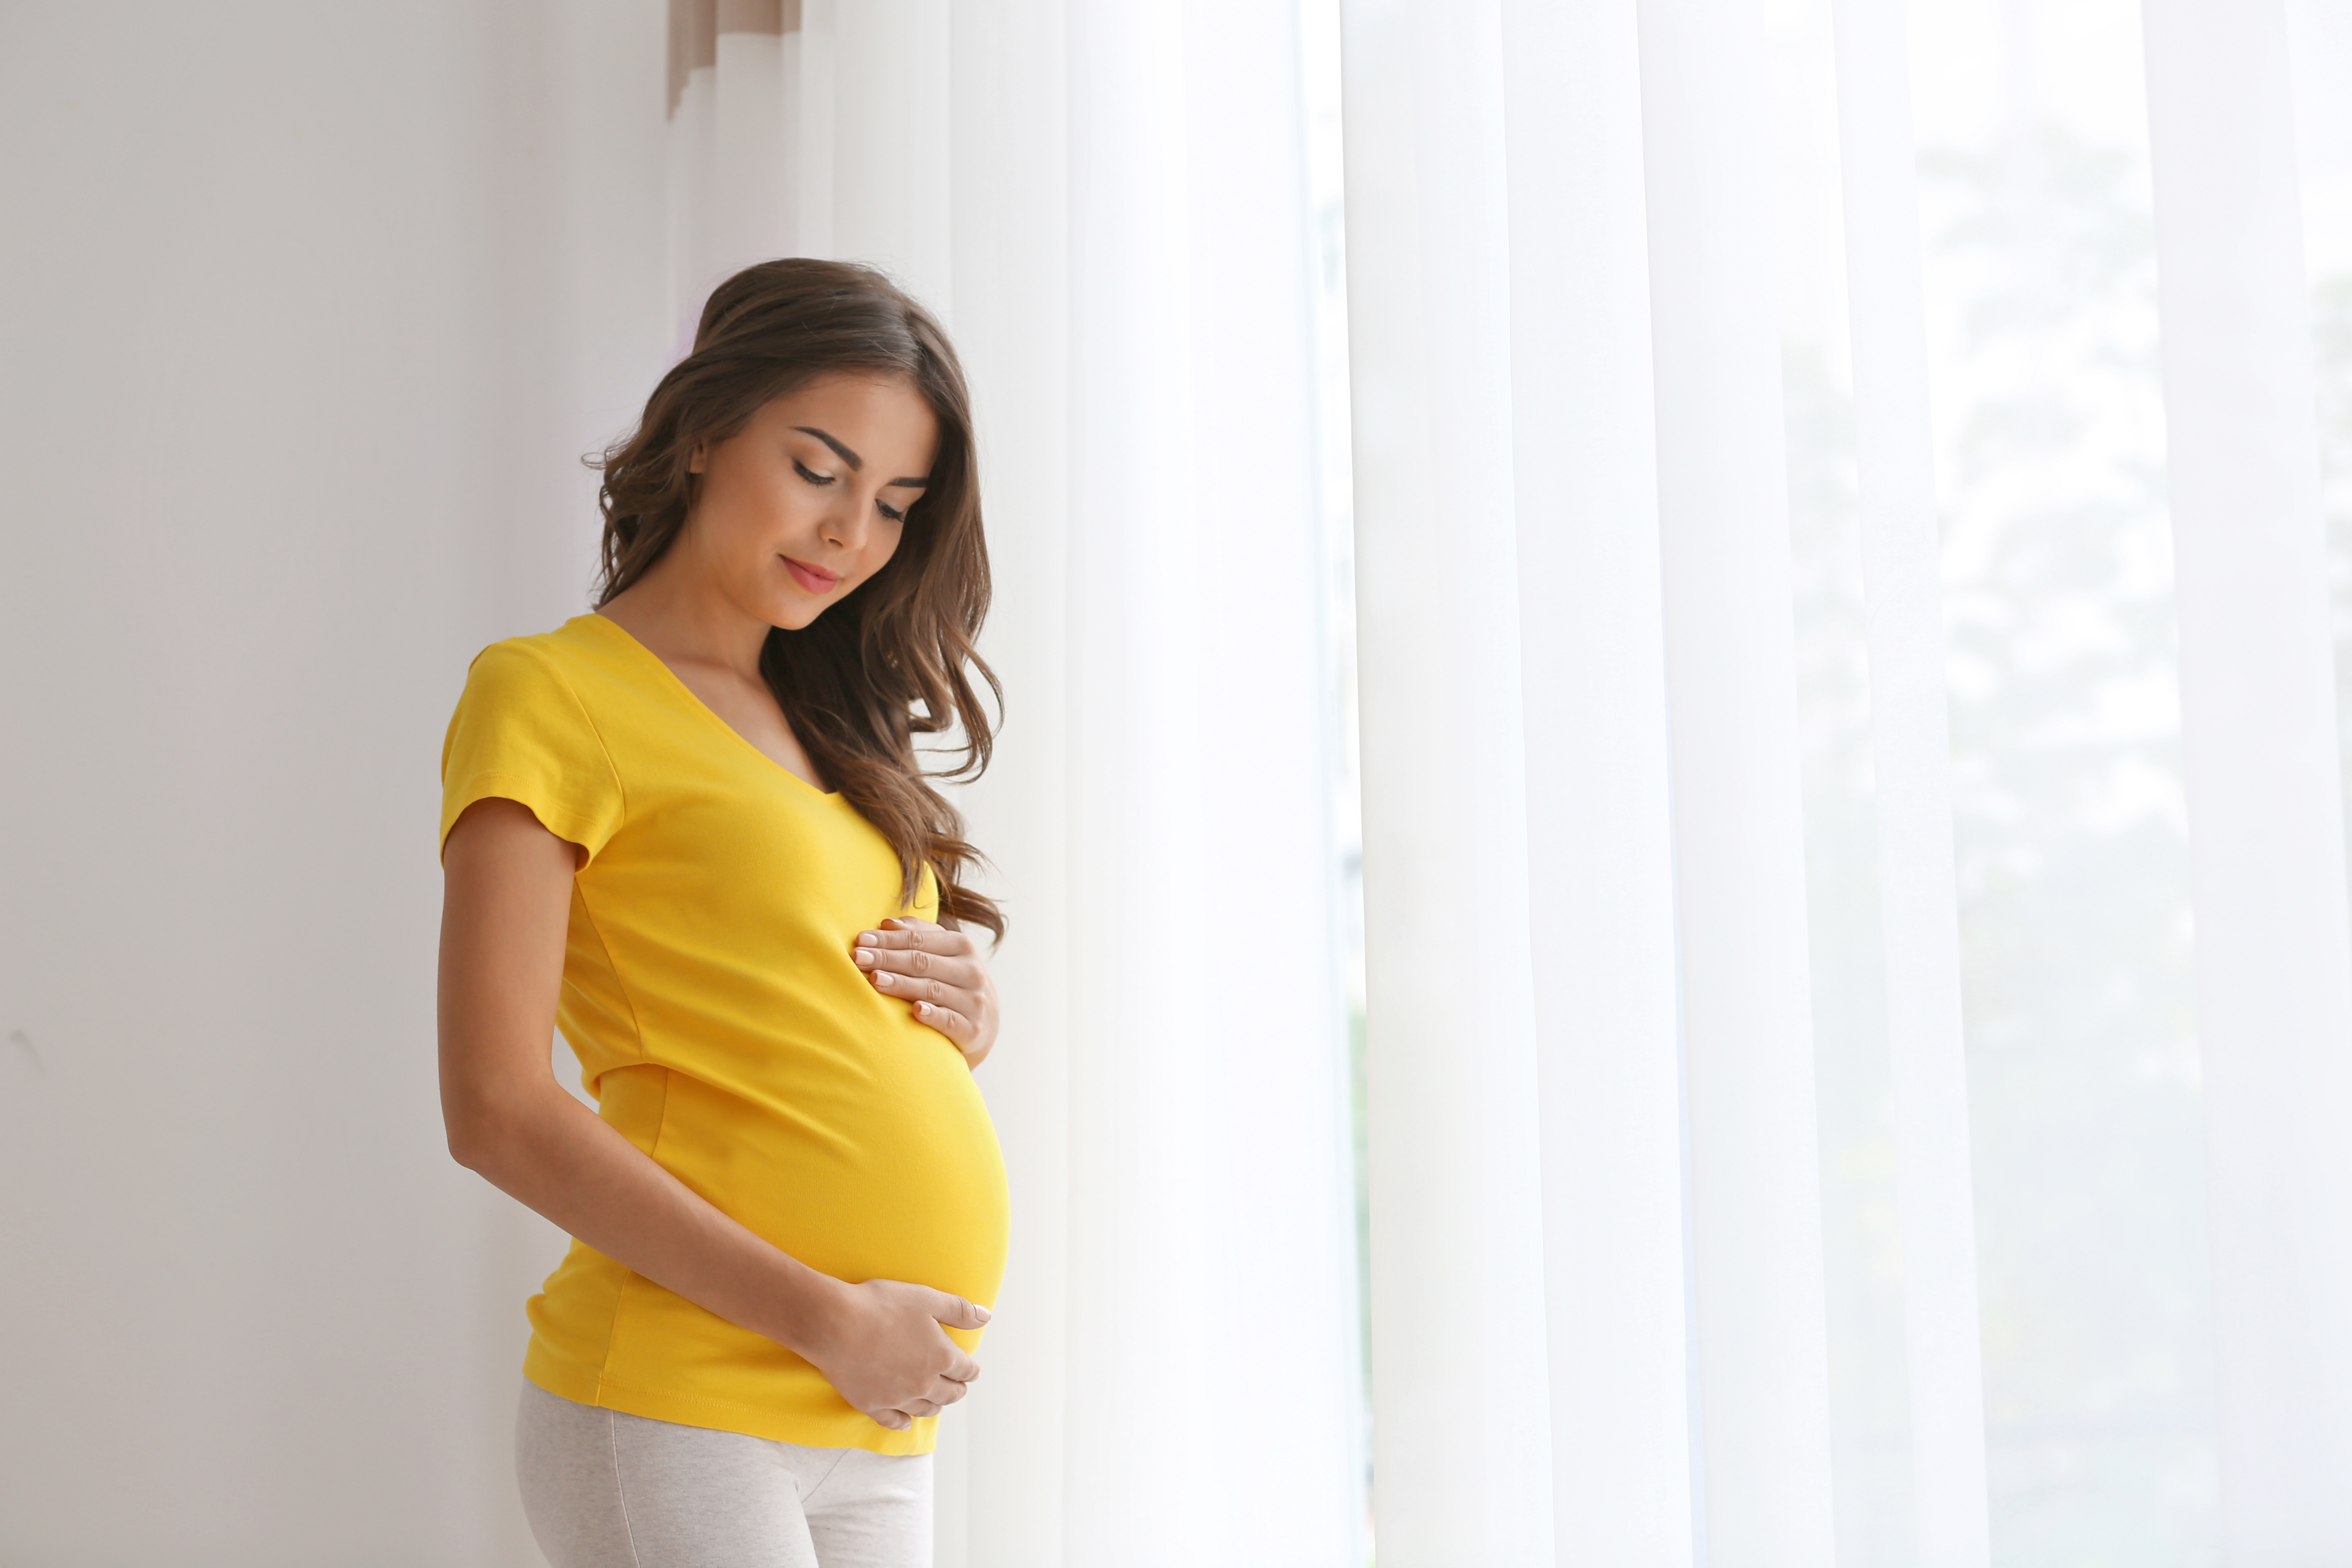 A pregnant woman in a yellow shirt holding her belly | Source: Shutterstock